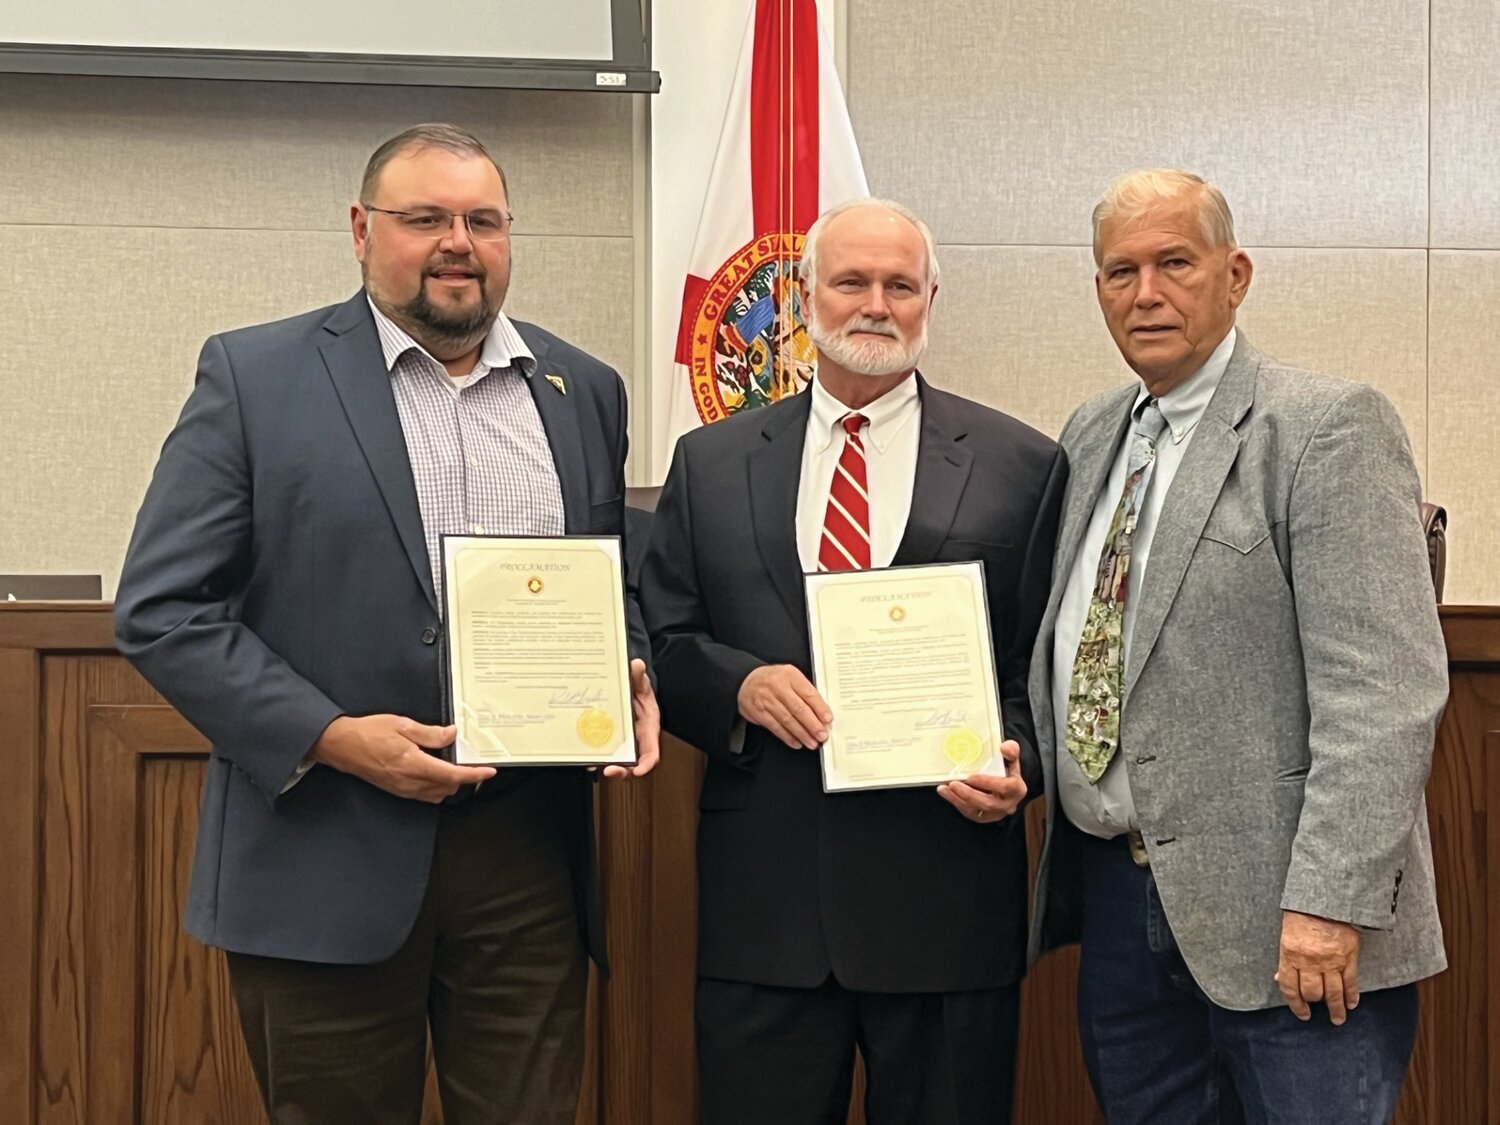 OKEECHOBEE – The Okeechobee County Board of Commissioners designated Feb. 18-24 as Engineers Week. Left to right are Marcos Montes De Oca, Stef Mathes and Okeechobee County Commission Chair David Hazellief. Founded by NSPE in 1951, Engineers Week is dedicated to ensuring a diverse and well educated future engineering workforce by increasing understanding of and interest in engineering and technology careers. Today, Engineers Week is a formal coalition of more than 70 engineering, education, and cultural societies, and more than 50 corporations and government agencies. Dedicated to raising public awareness of engineers' positive contributions to quality of life, Engineers Week promotes recognition among parents, teachers, and students of the importance of a technical education and a high level of math, science, and technology literacy, and motivates youth, to pursue engineering careers in order to provide a diverse and vigorous engineering workforce. [Photo by Katrina Elsken/Lake Okeechobee News]